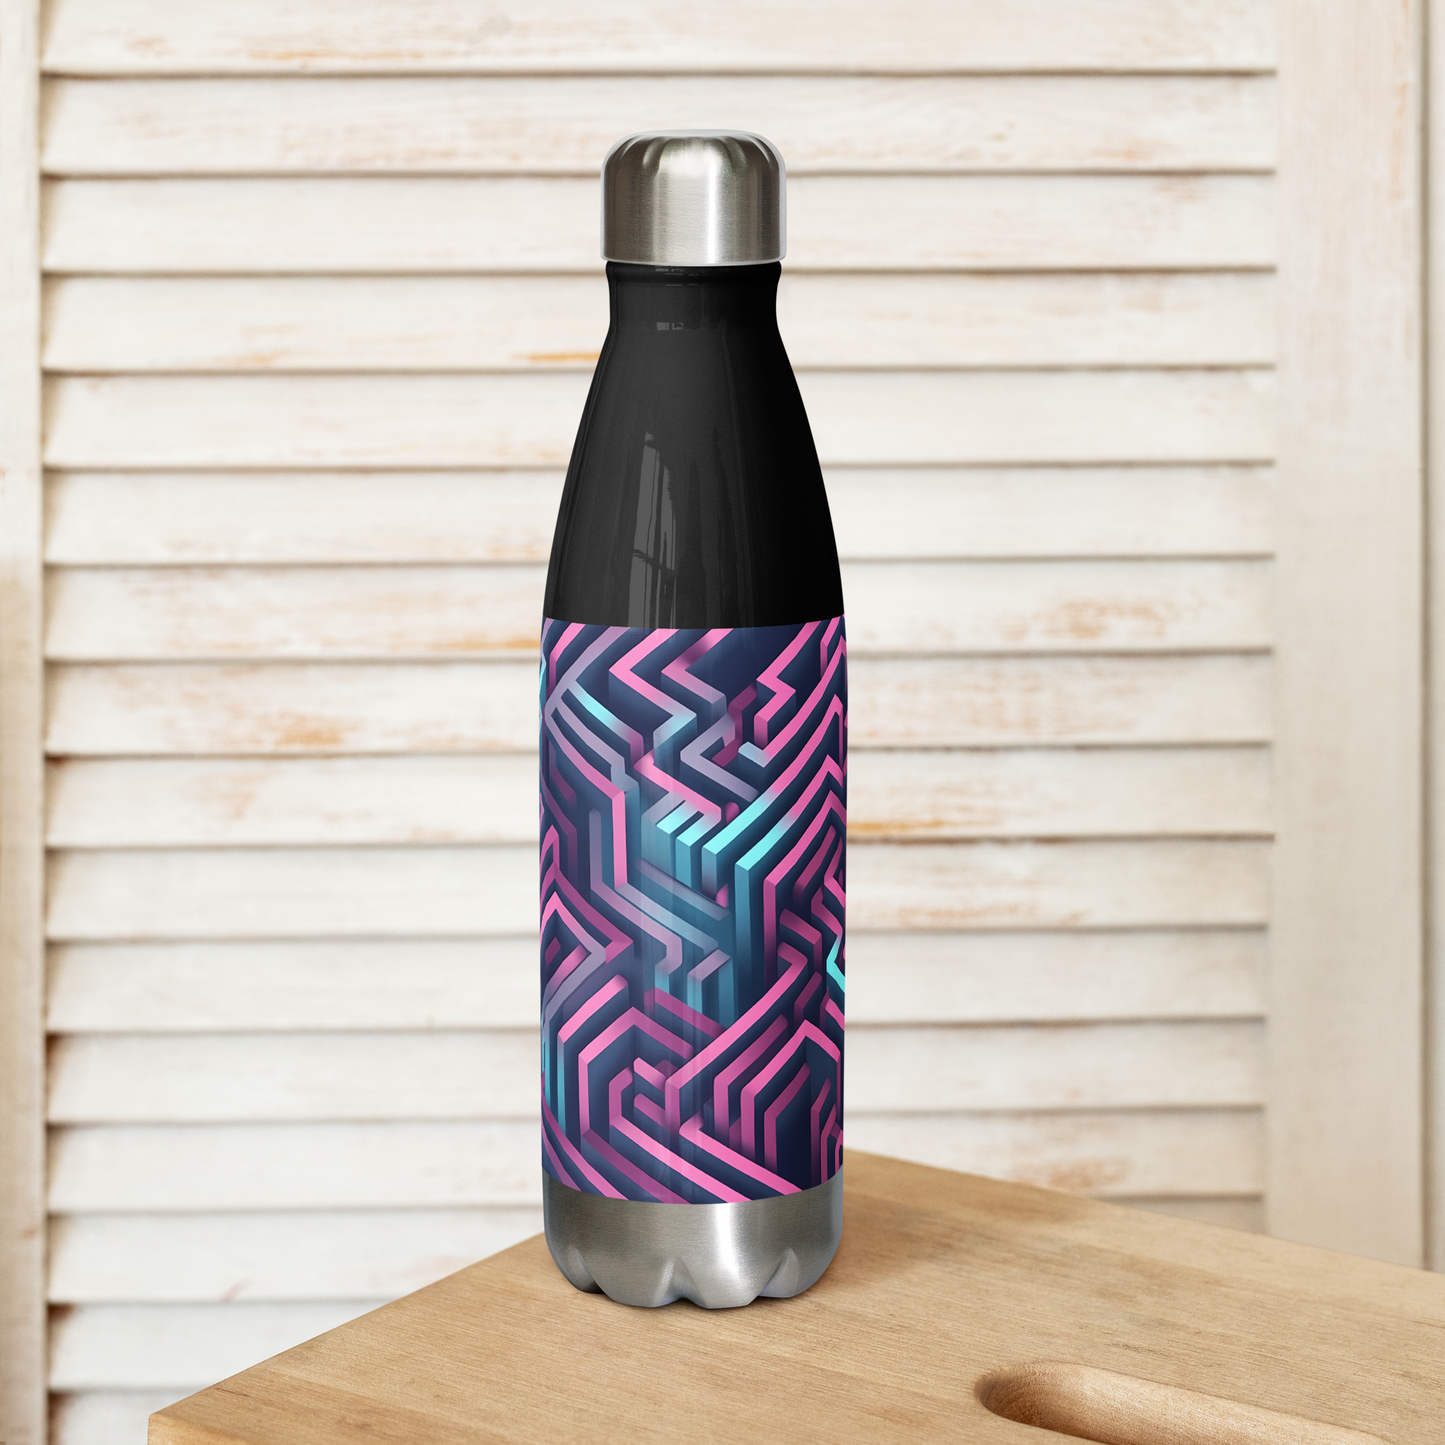 3D Maze Illusion | 3D Patterns | Stainless Steel Water Bottle - #4